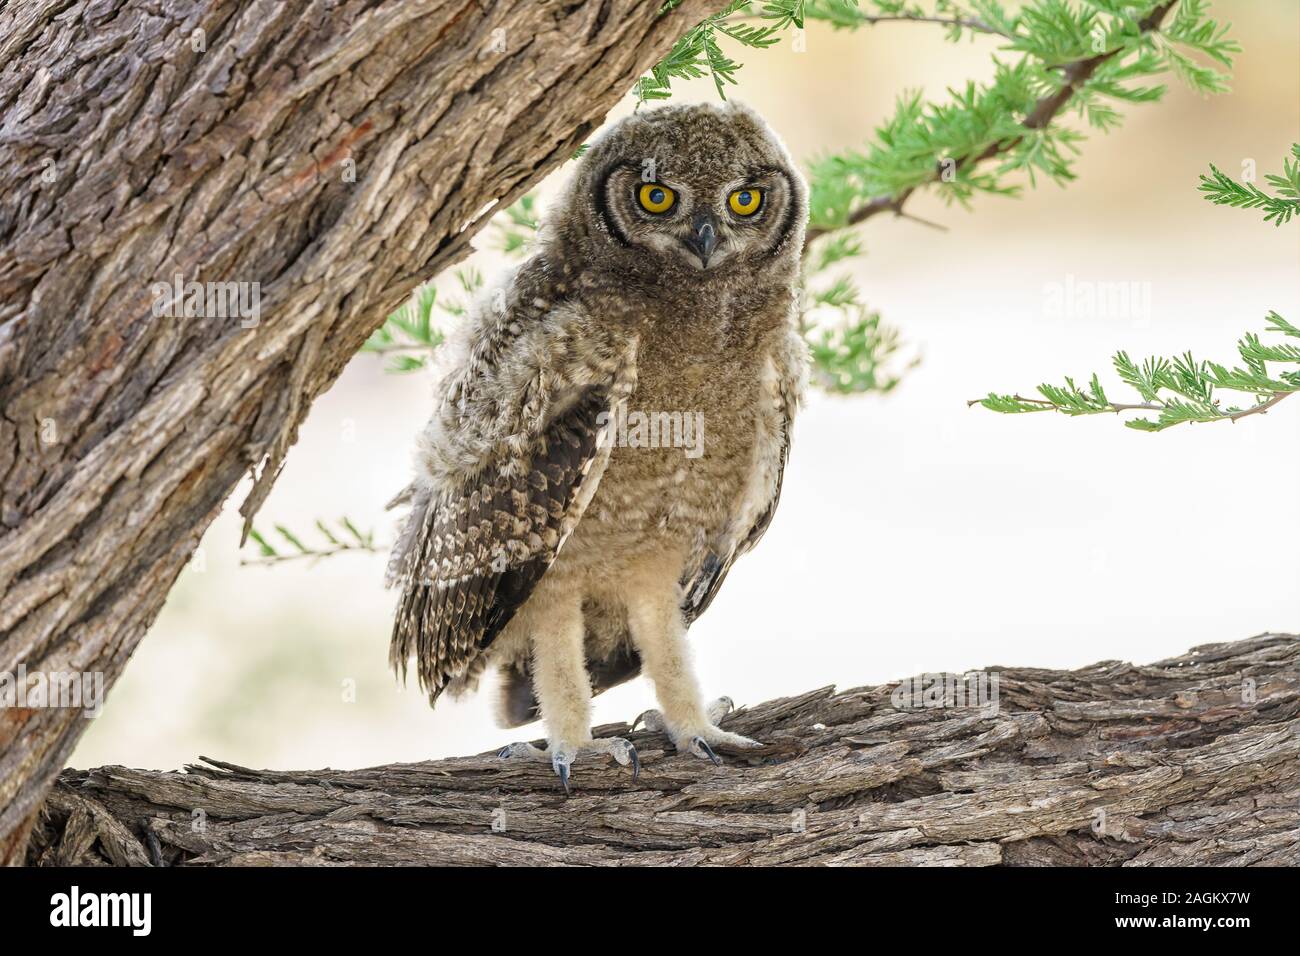 Young owl with bright yellow eyes Stock Photo